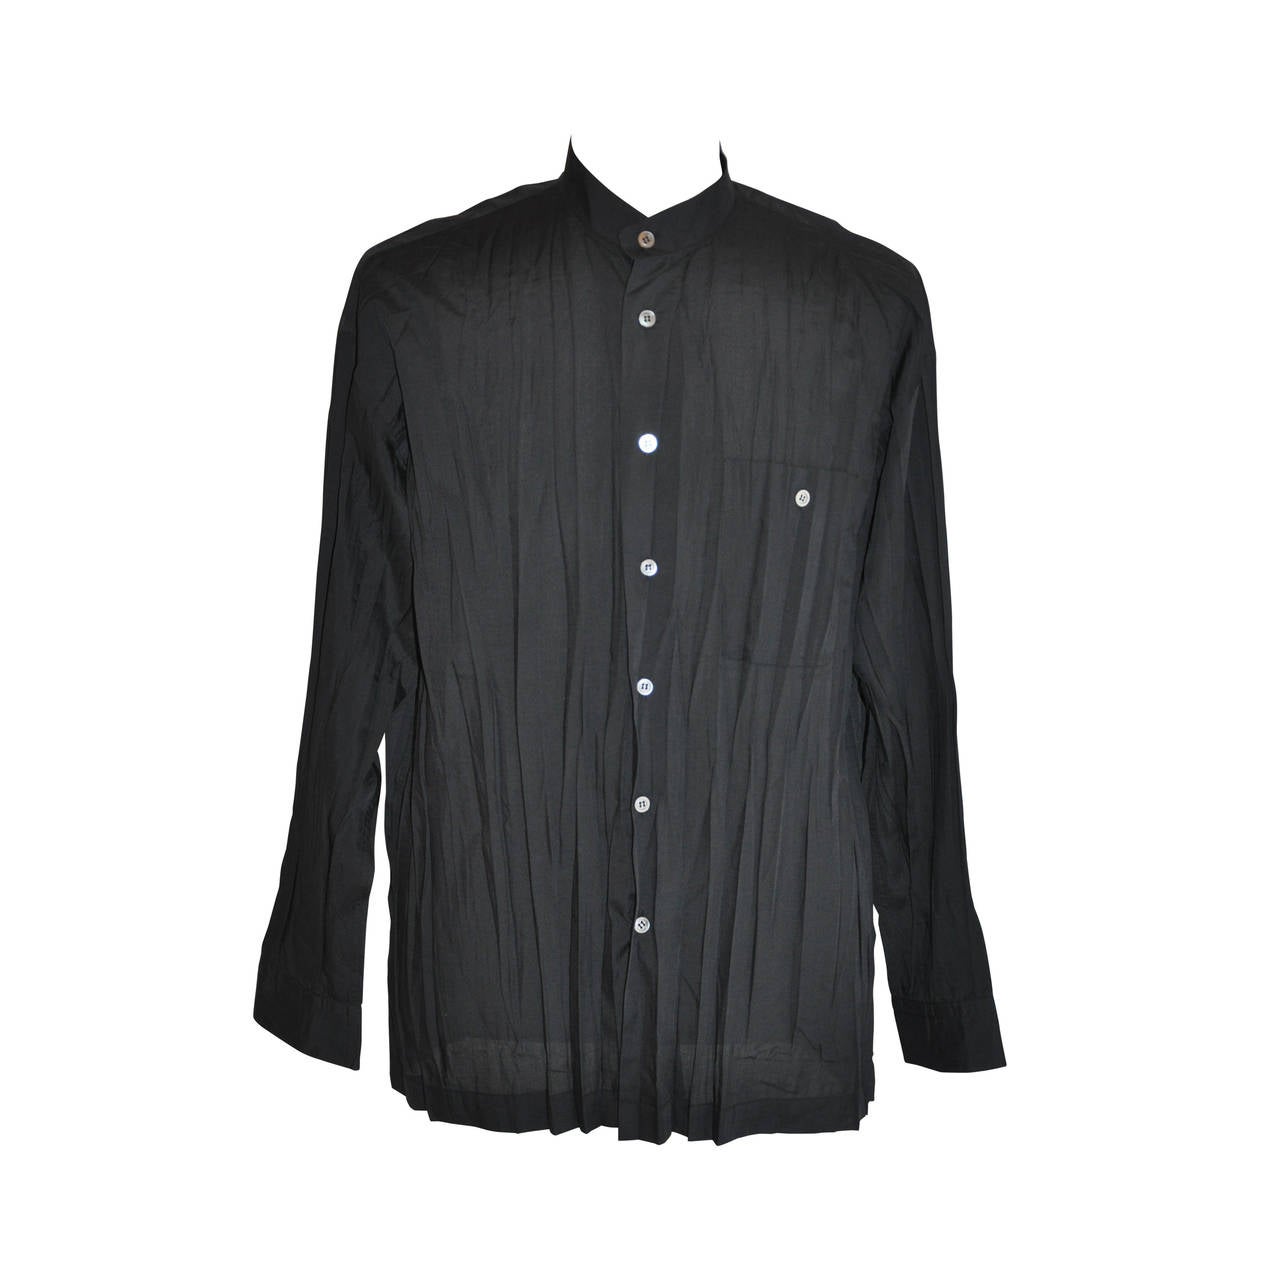 Issey Miyake Men's Black Accordian Shirt with Mother-of-Pearl Accent ...